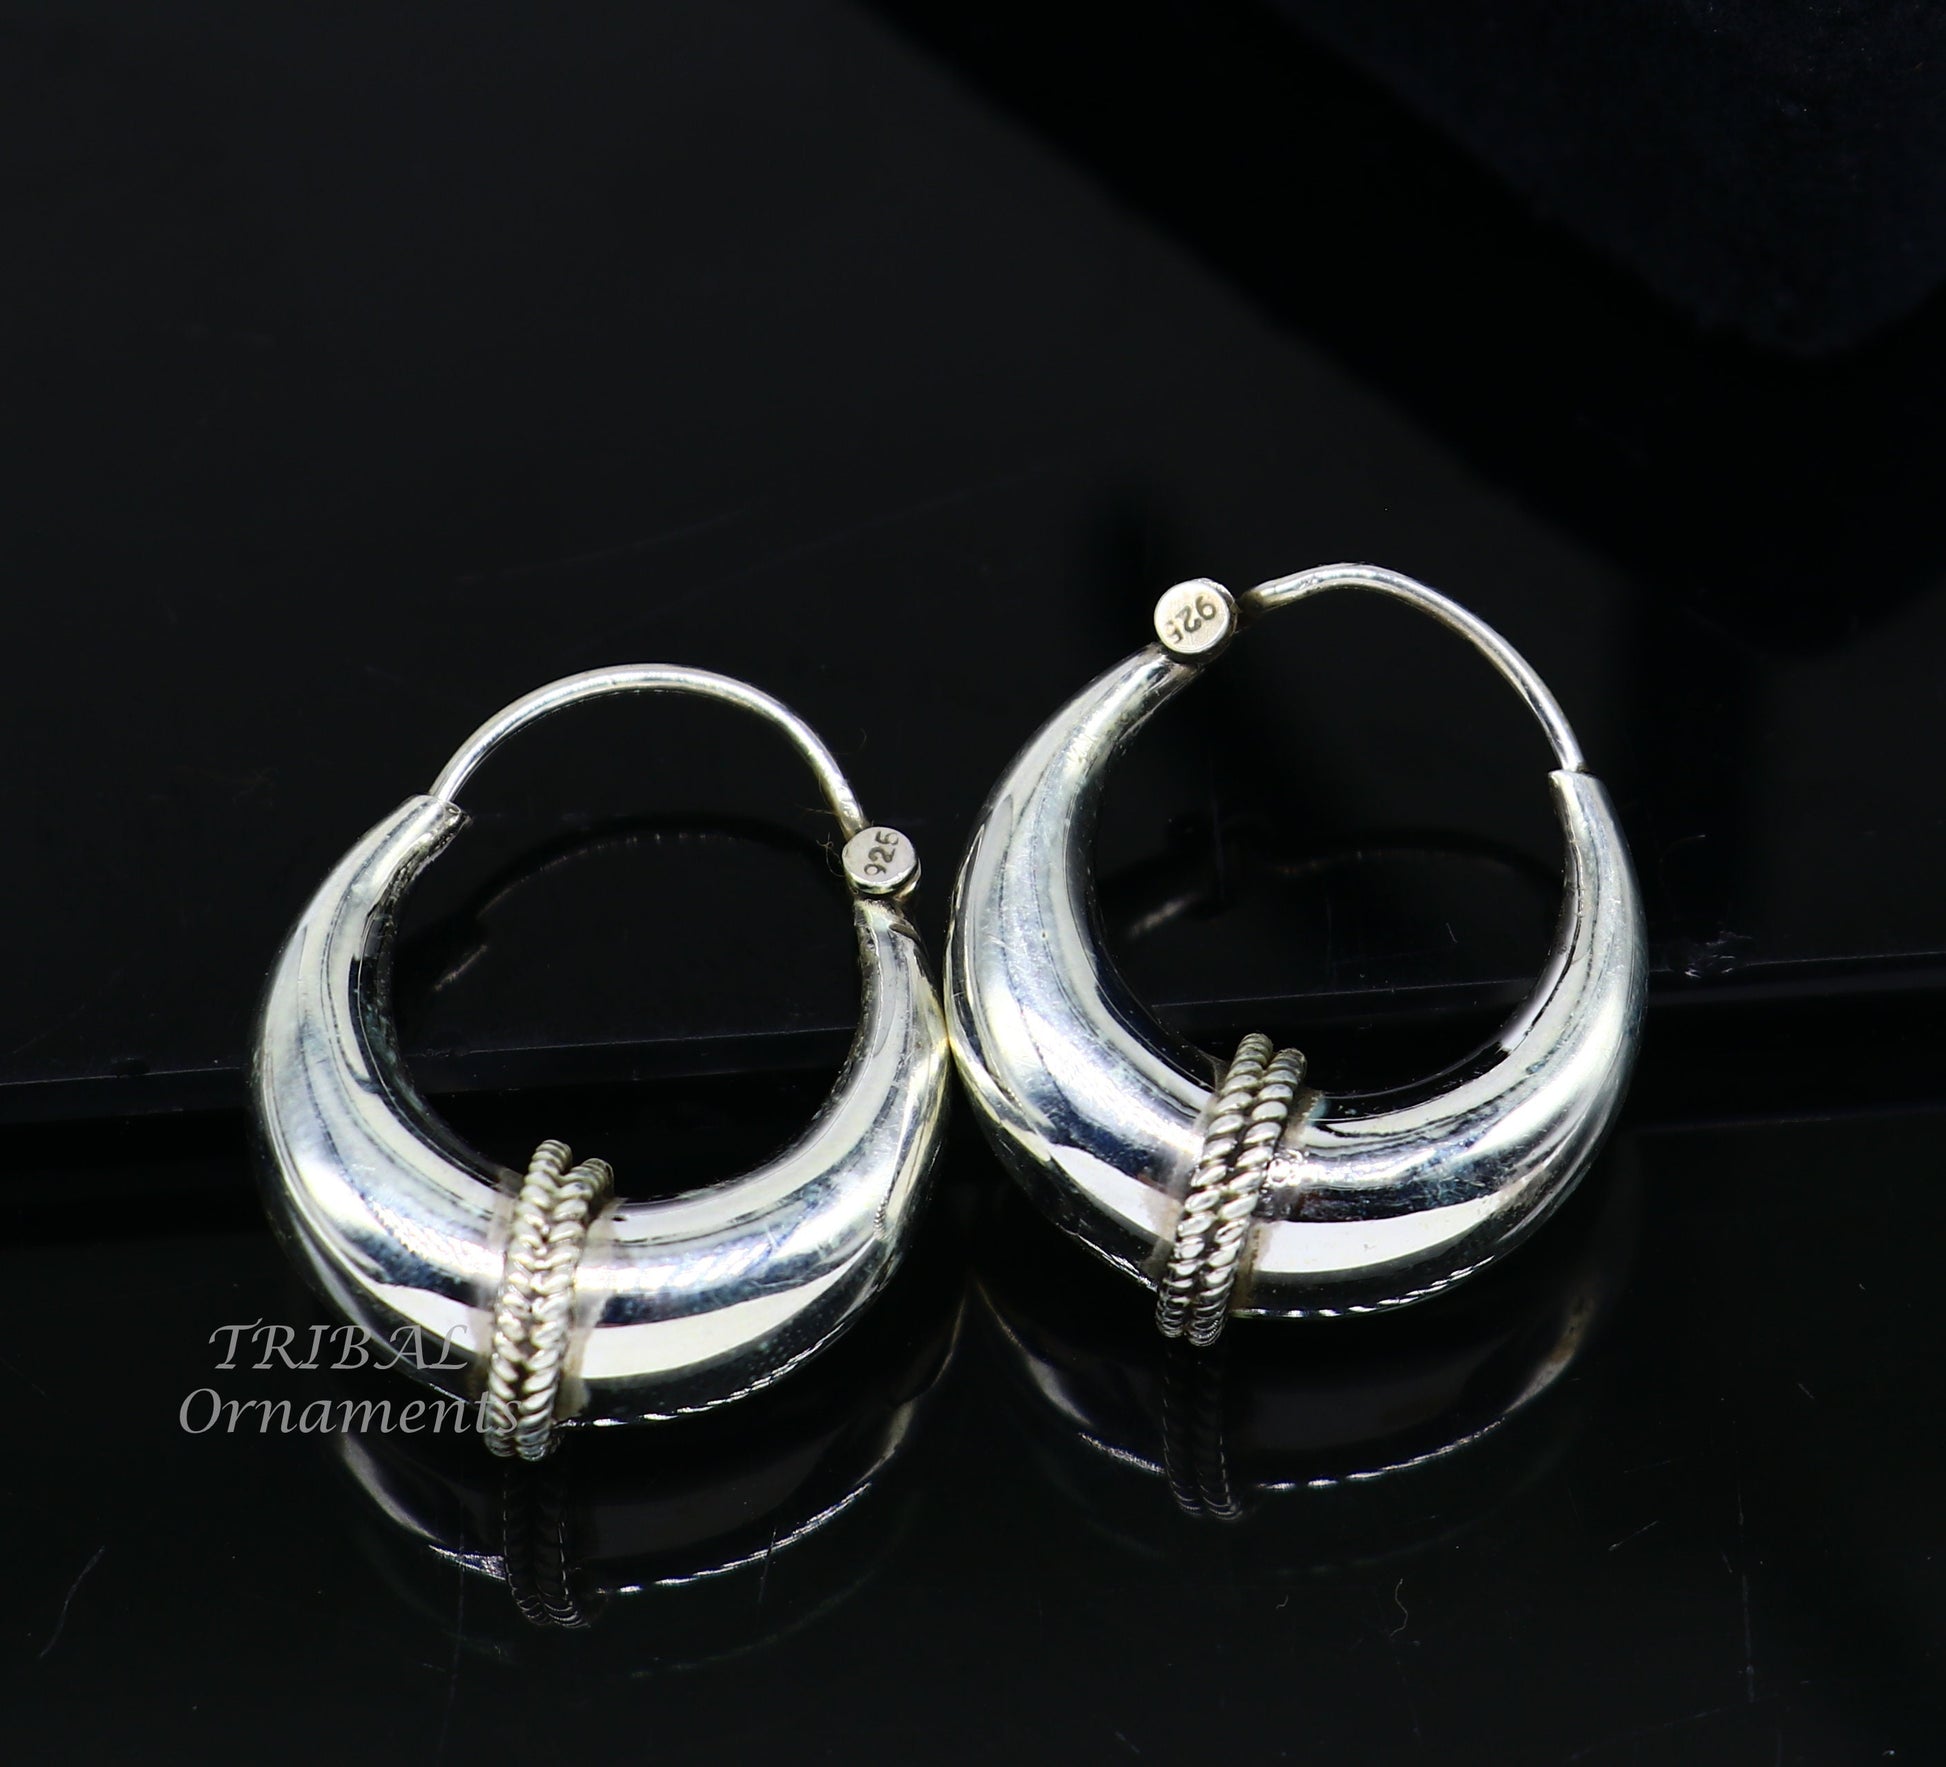 925 sterling silver handmade vintage ethnic style hoops earrings kundal,ethnic gorgeous bali tribal belly dance jewelry from india s1070 - TRIBAL ORNAMENTS